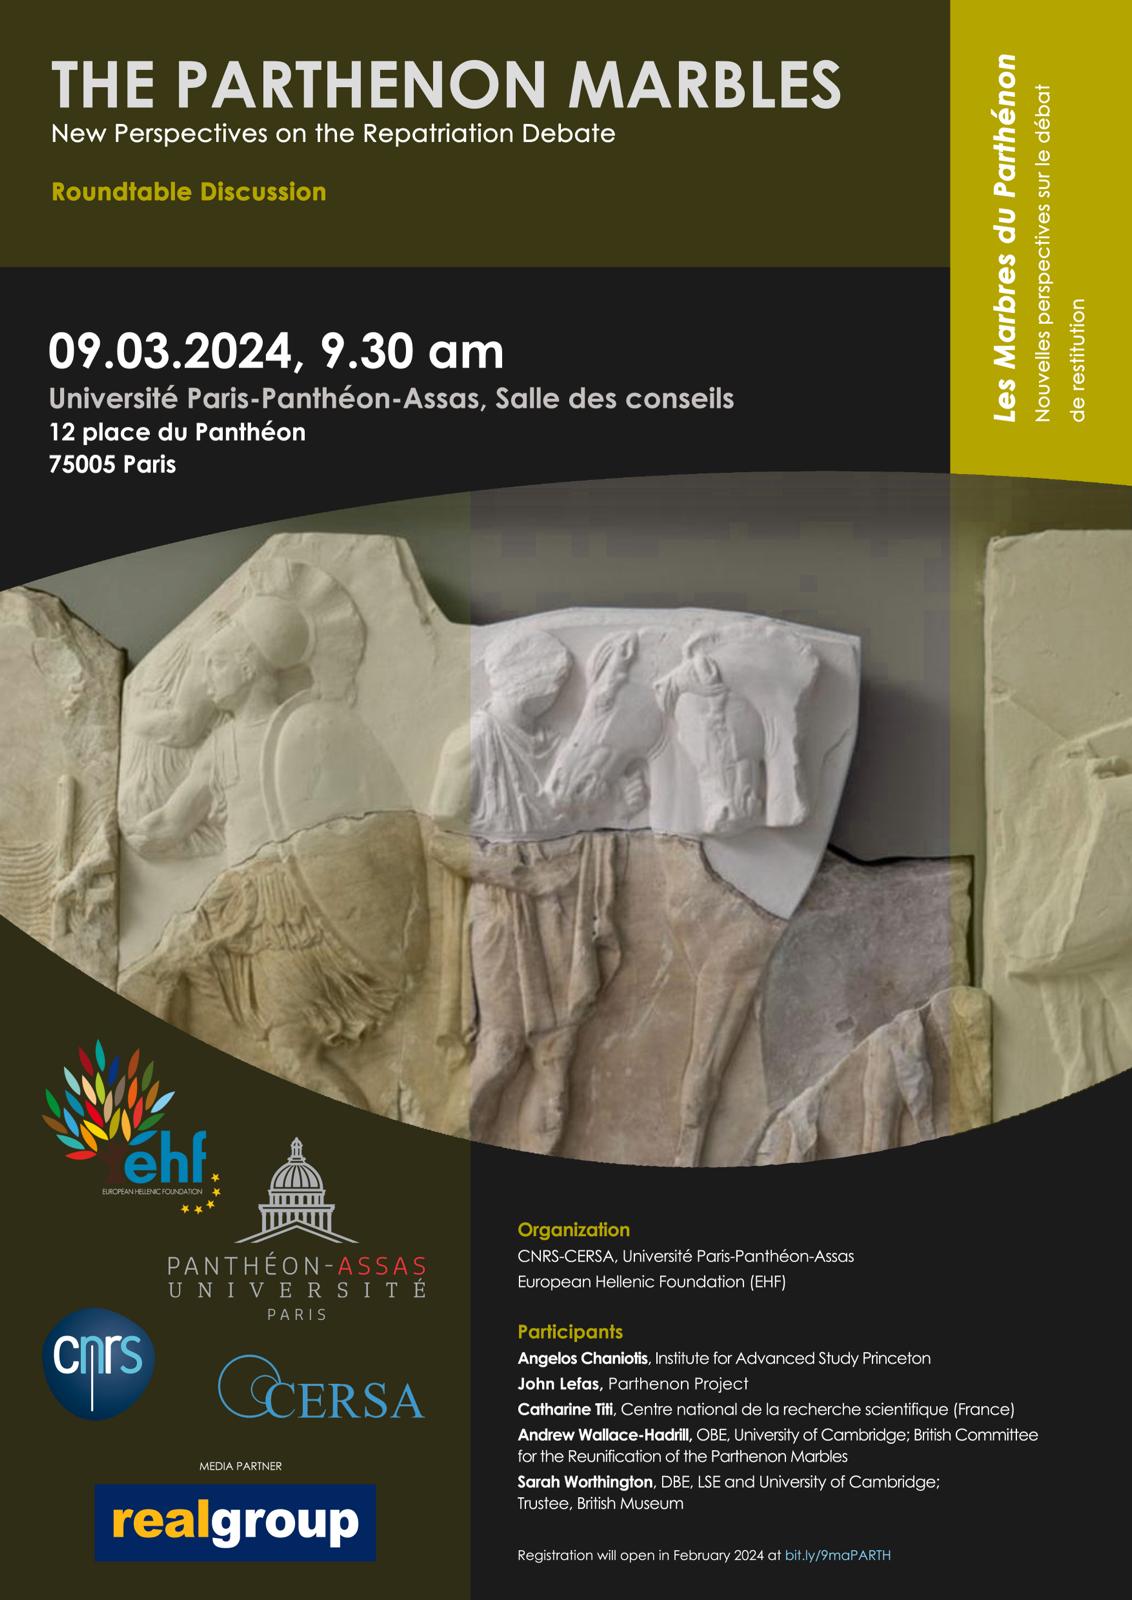 The Parthenon Marbles, New Perspective on the Repatriation Debate, a roundtable discussion, Paris 09 March 2024